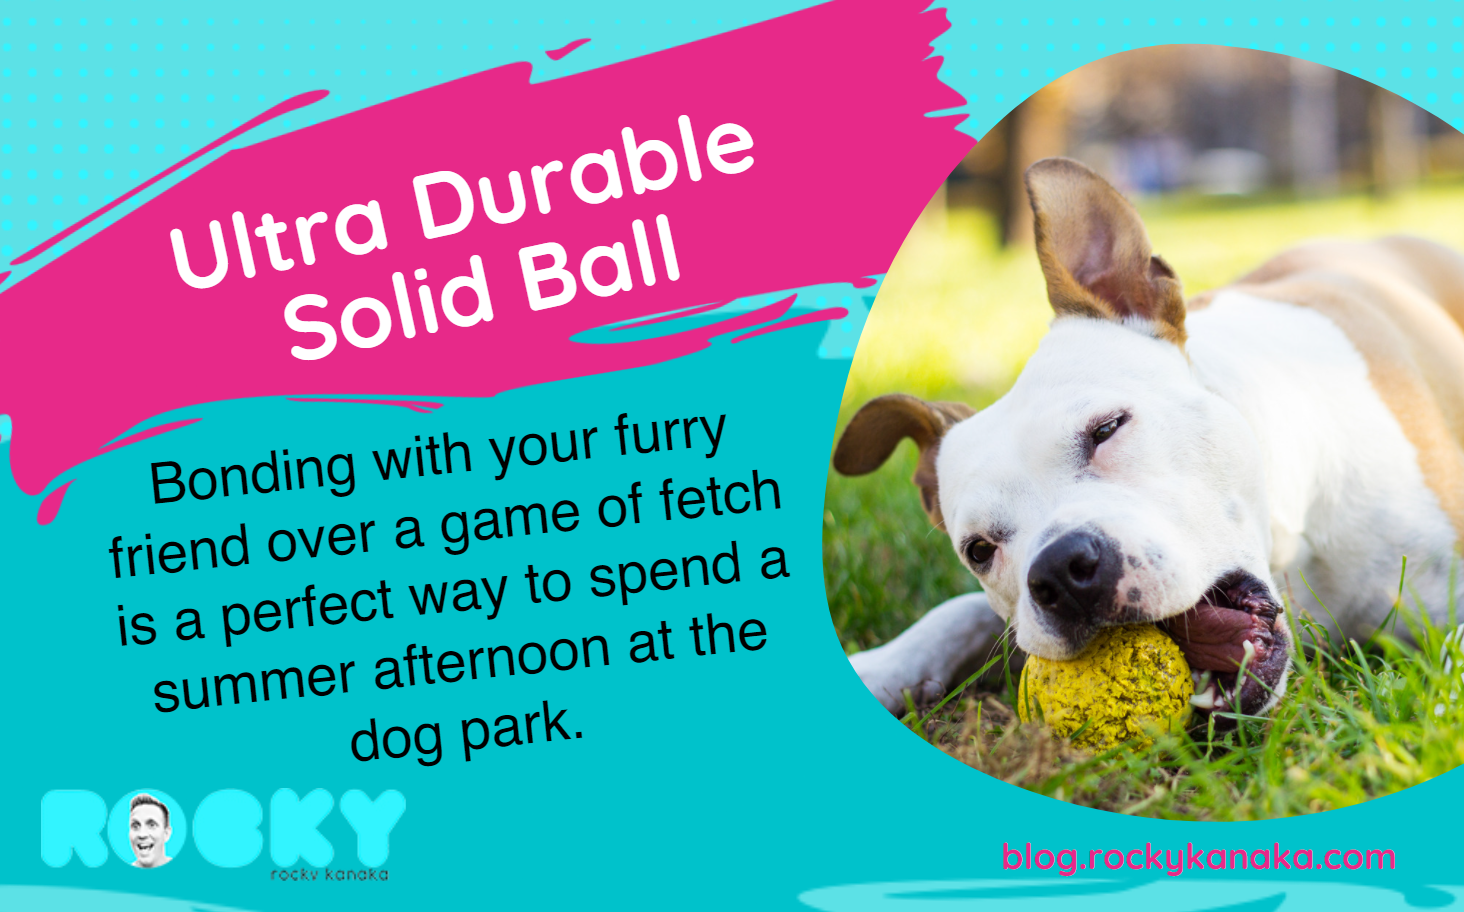 Ultra Durable Solid Ball - Monster K9 Dog Toys - indestructible dog toys